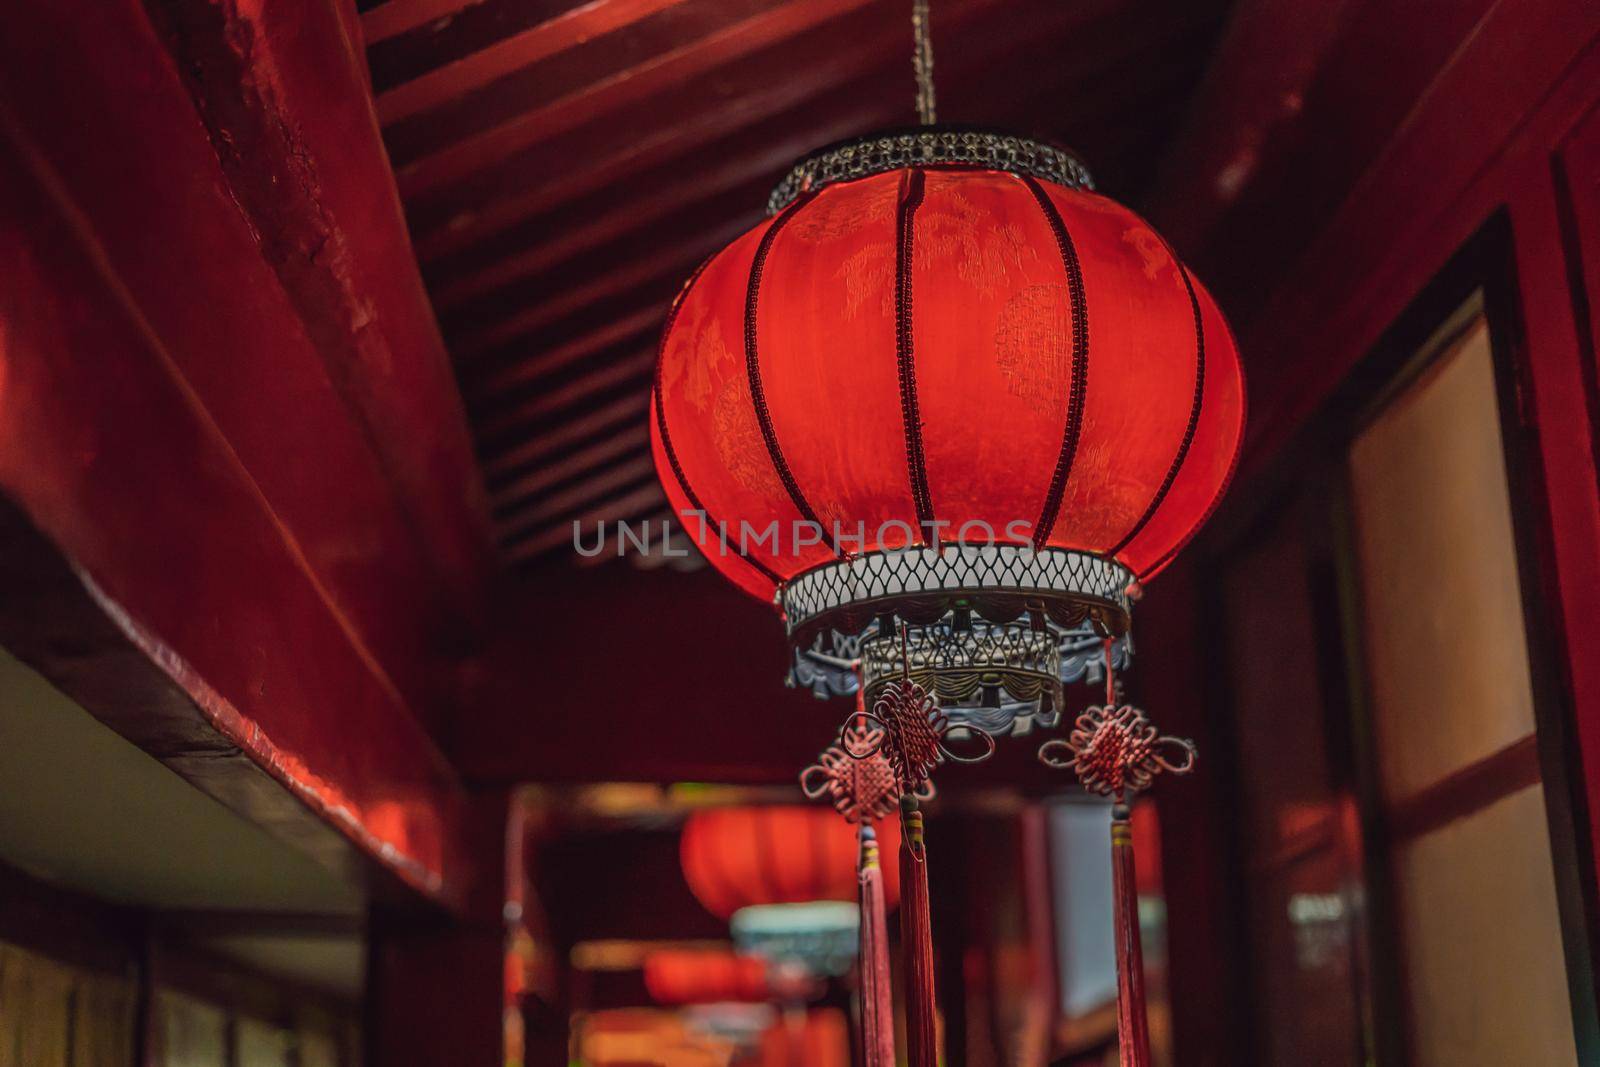 Chinese red lanterns for chinese new year. Chinese lanterns during new year festival.